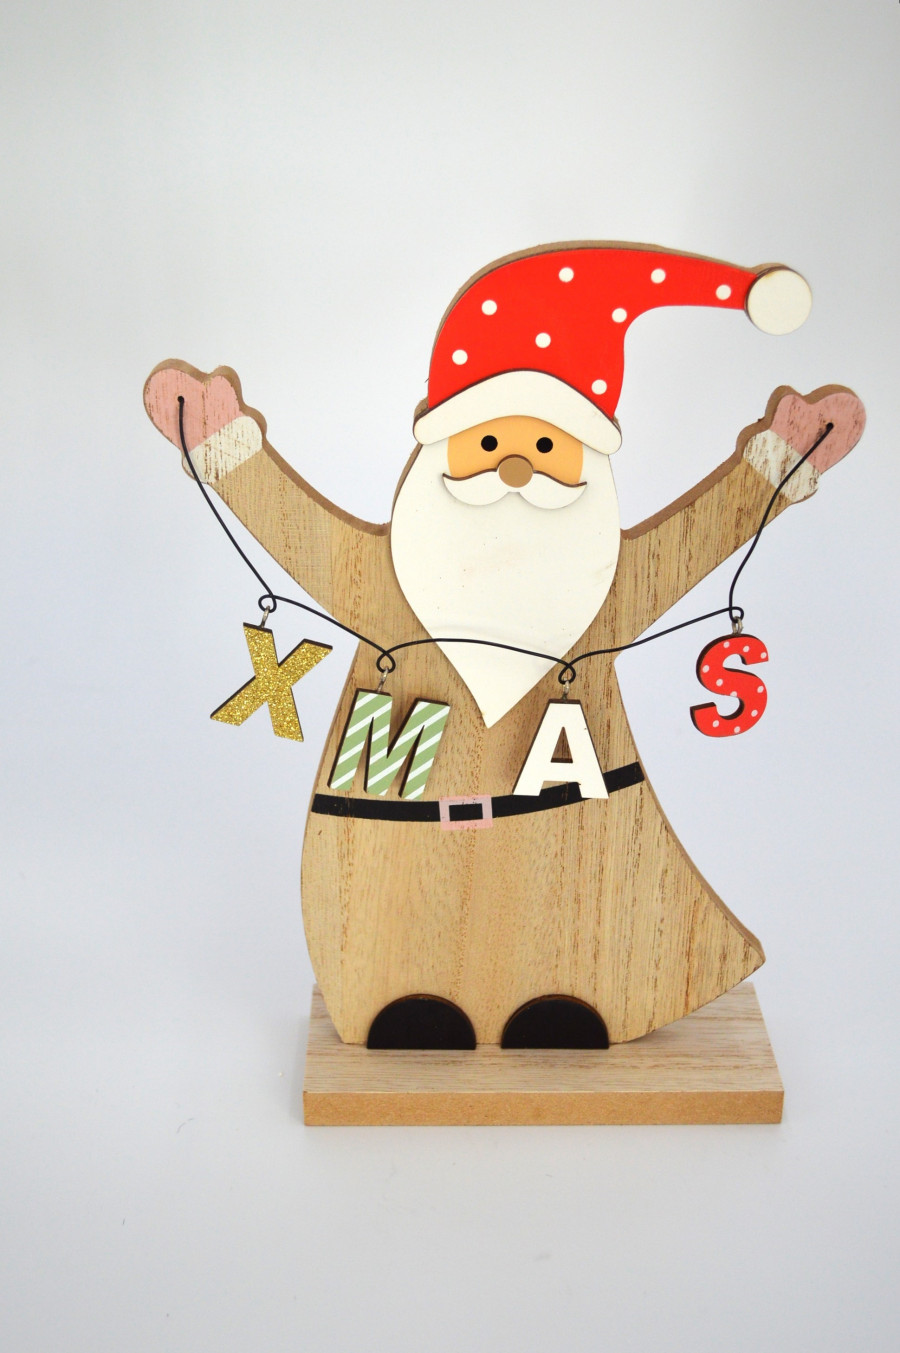 88179 - Wooden freestanding Christmas and Winter Decoration Ornaments - Santa Claus Christmas